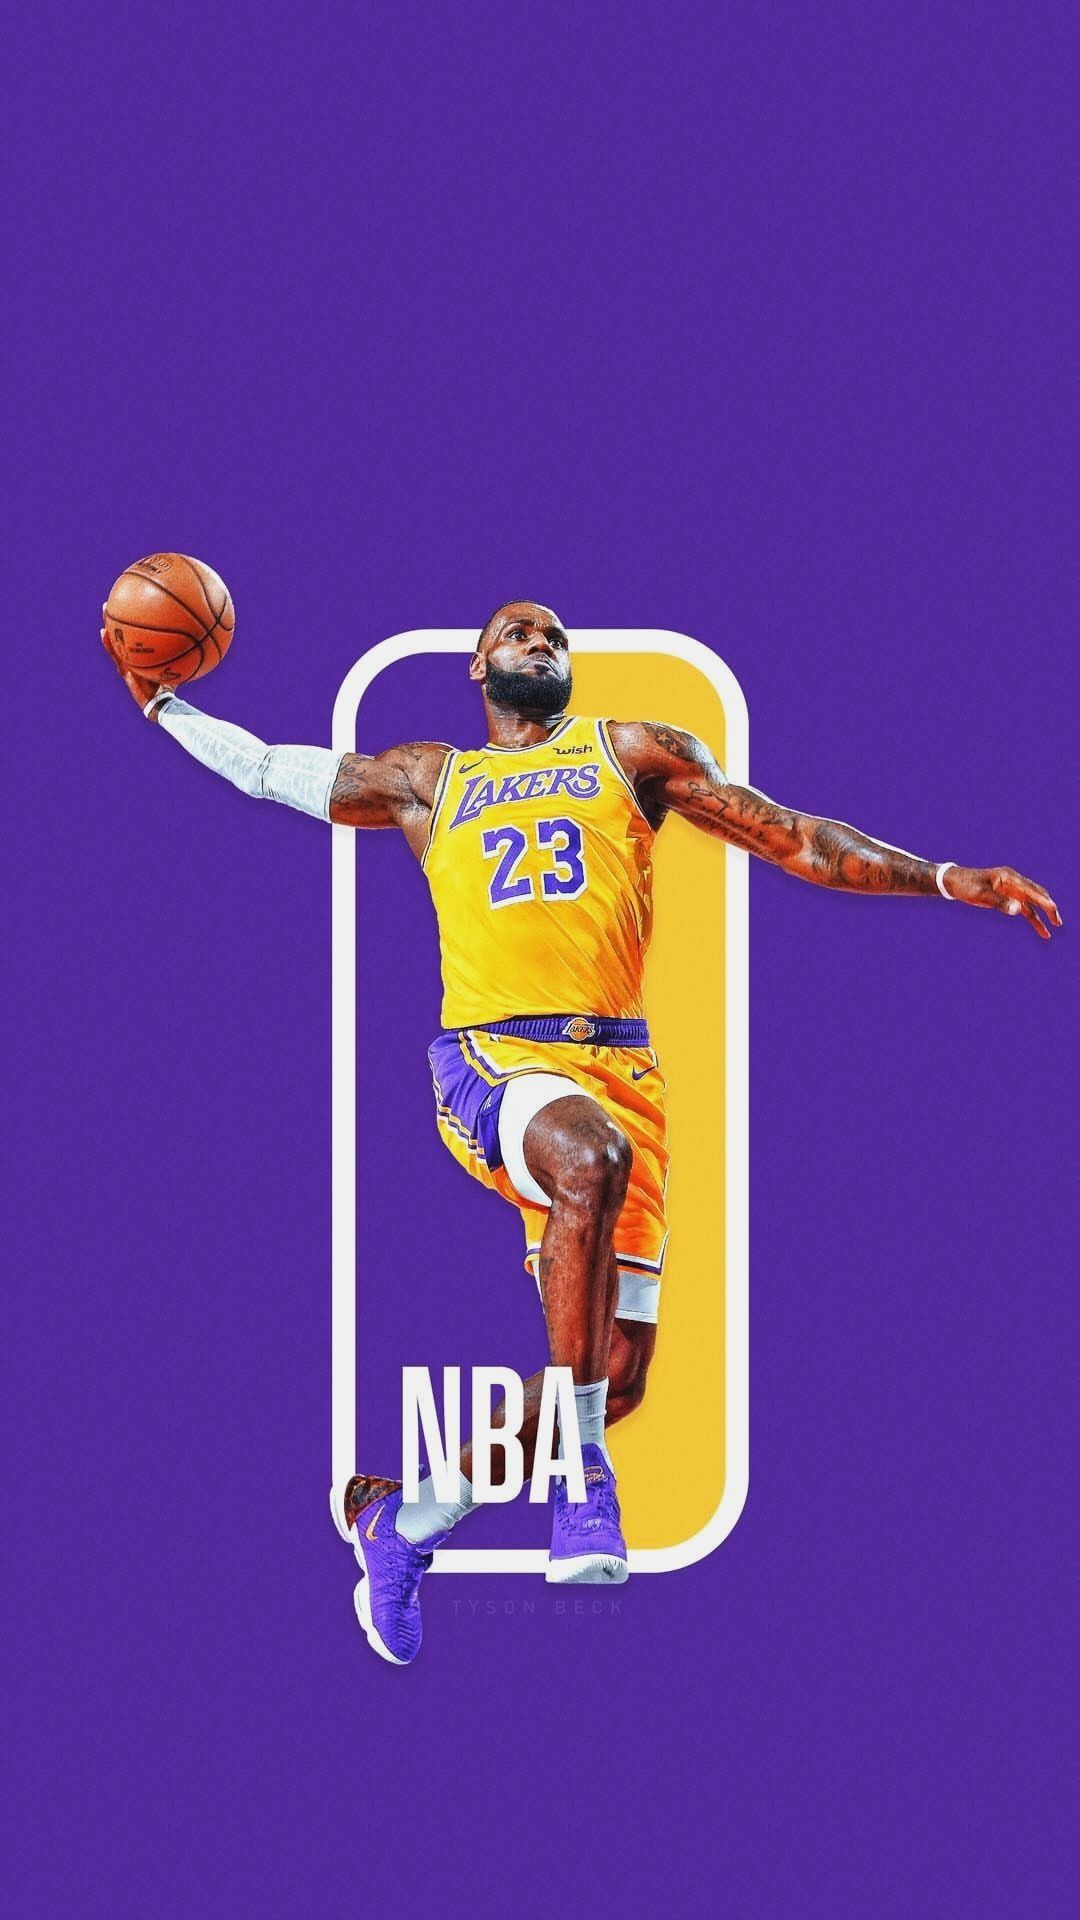 15 Lakers Logo and People Wallpapers